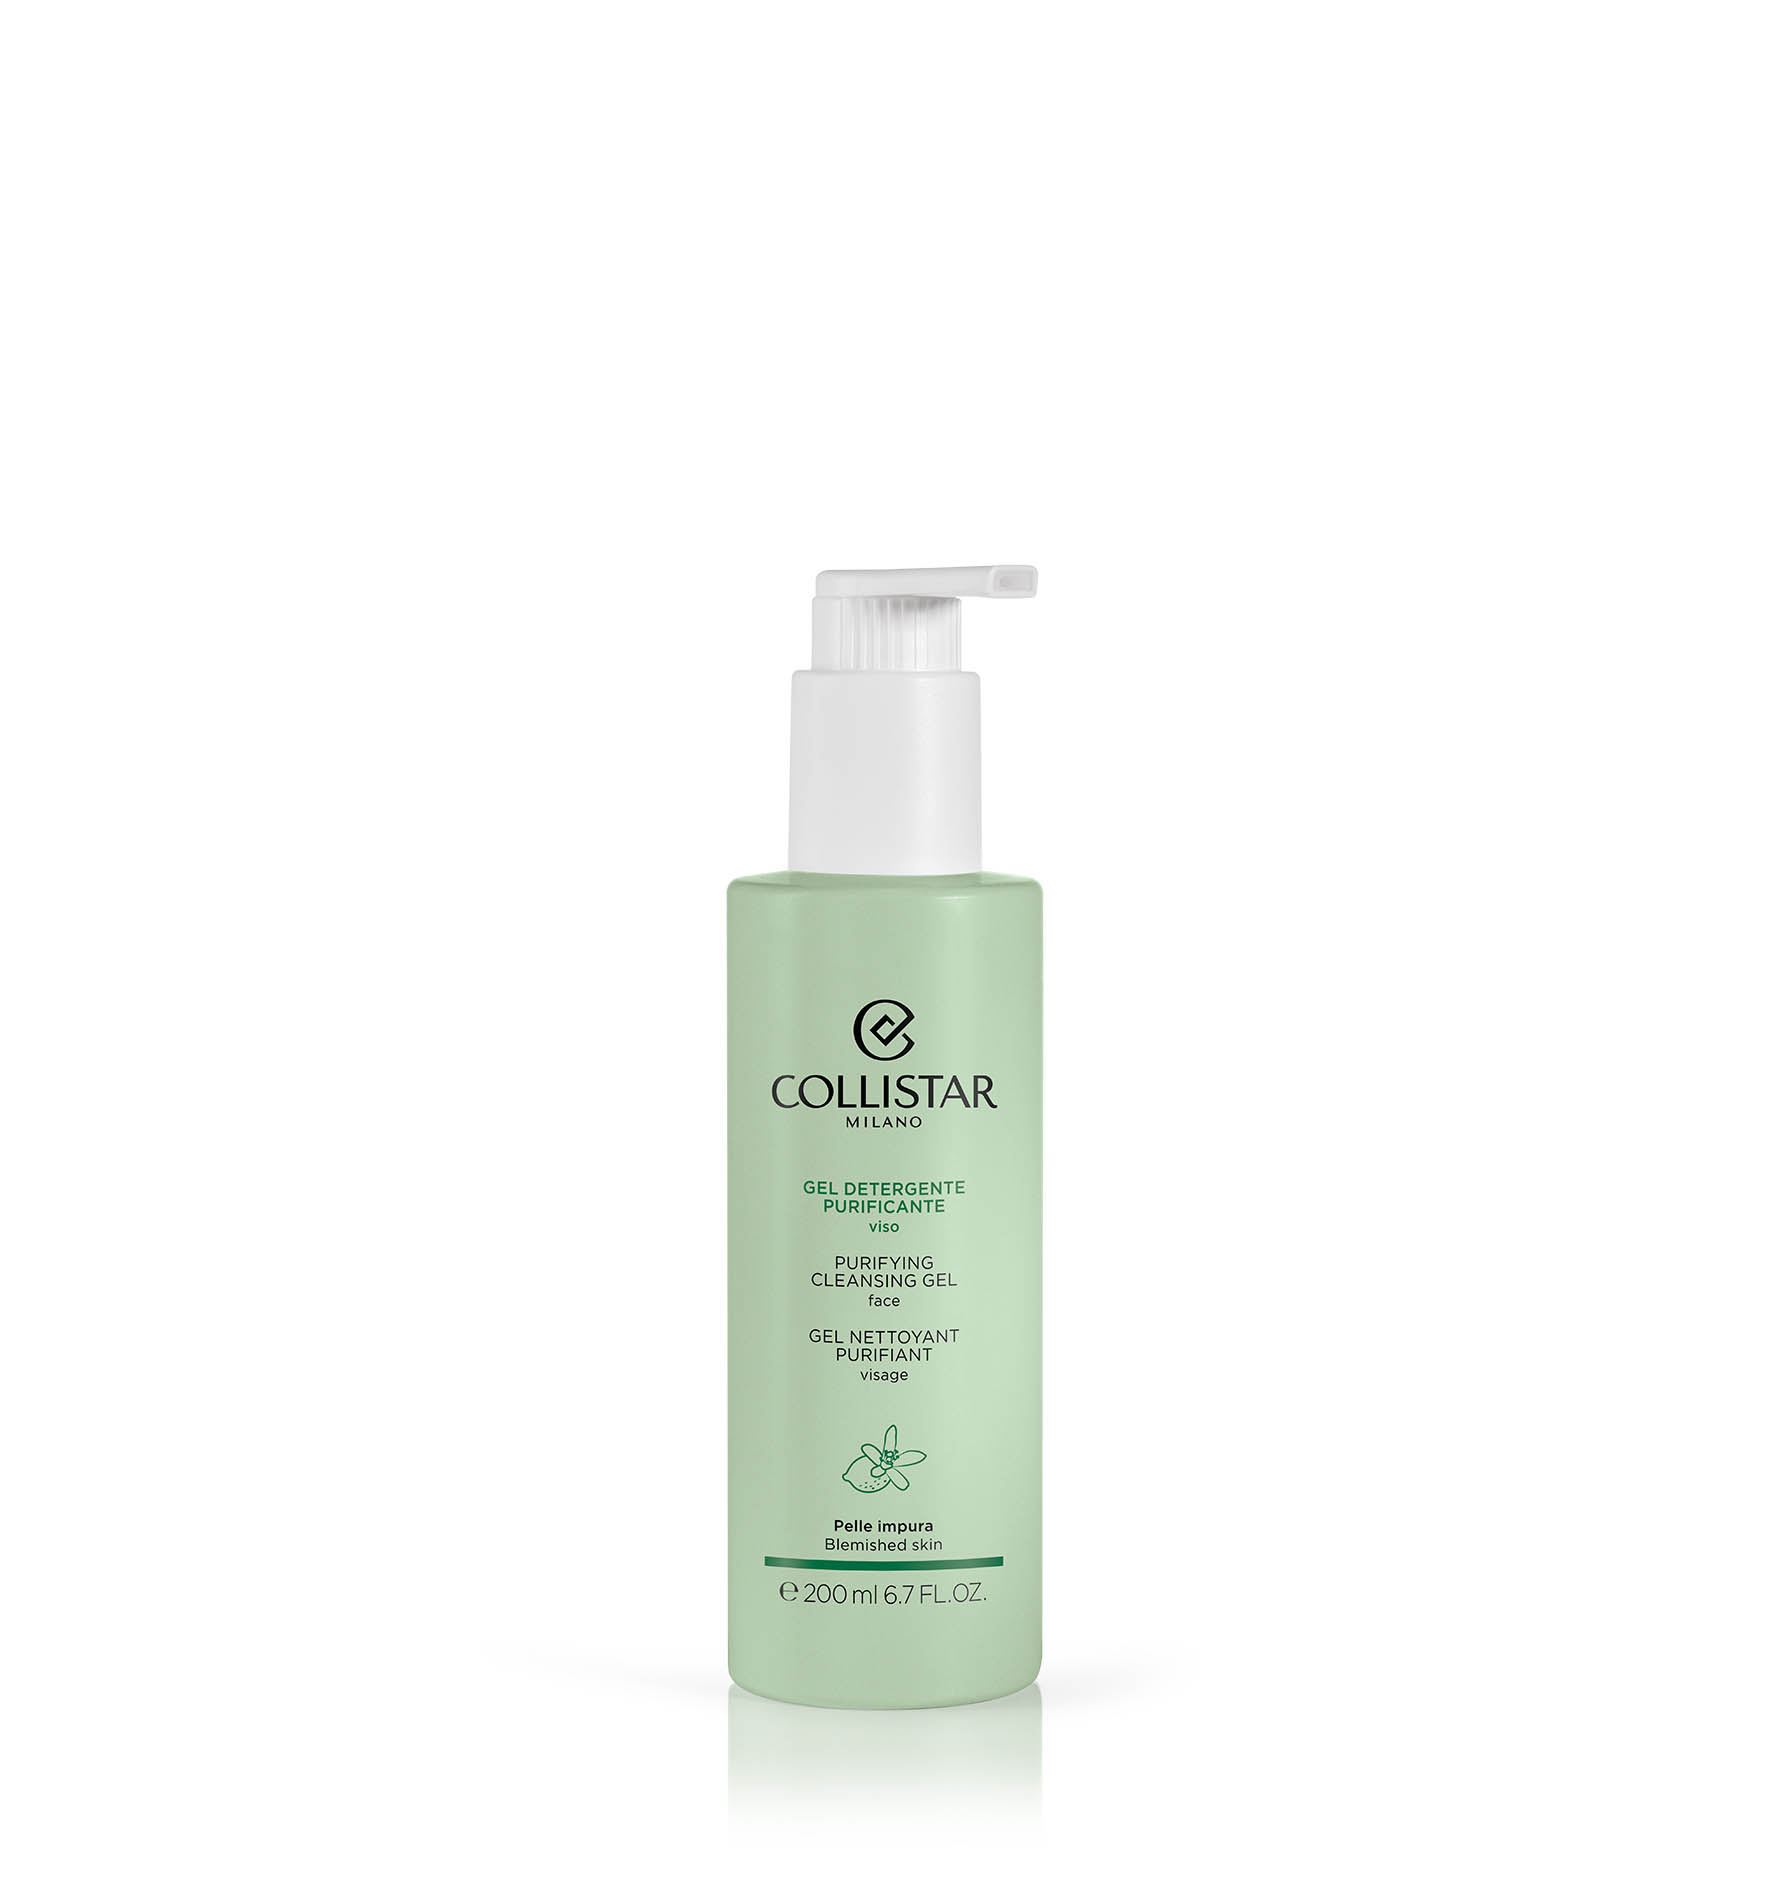 PURIFYING CLEANSING GEL FACE - Dry skin | Collistar - Shop Online Ufficiale